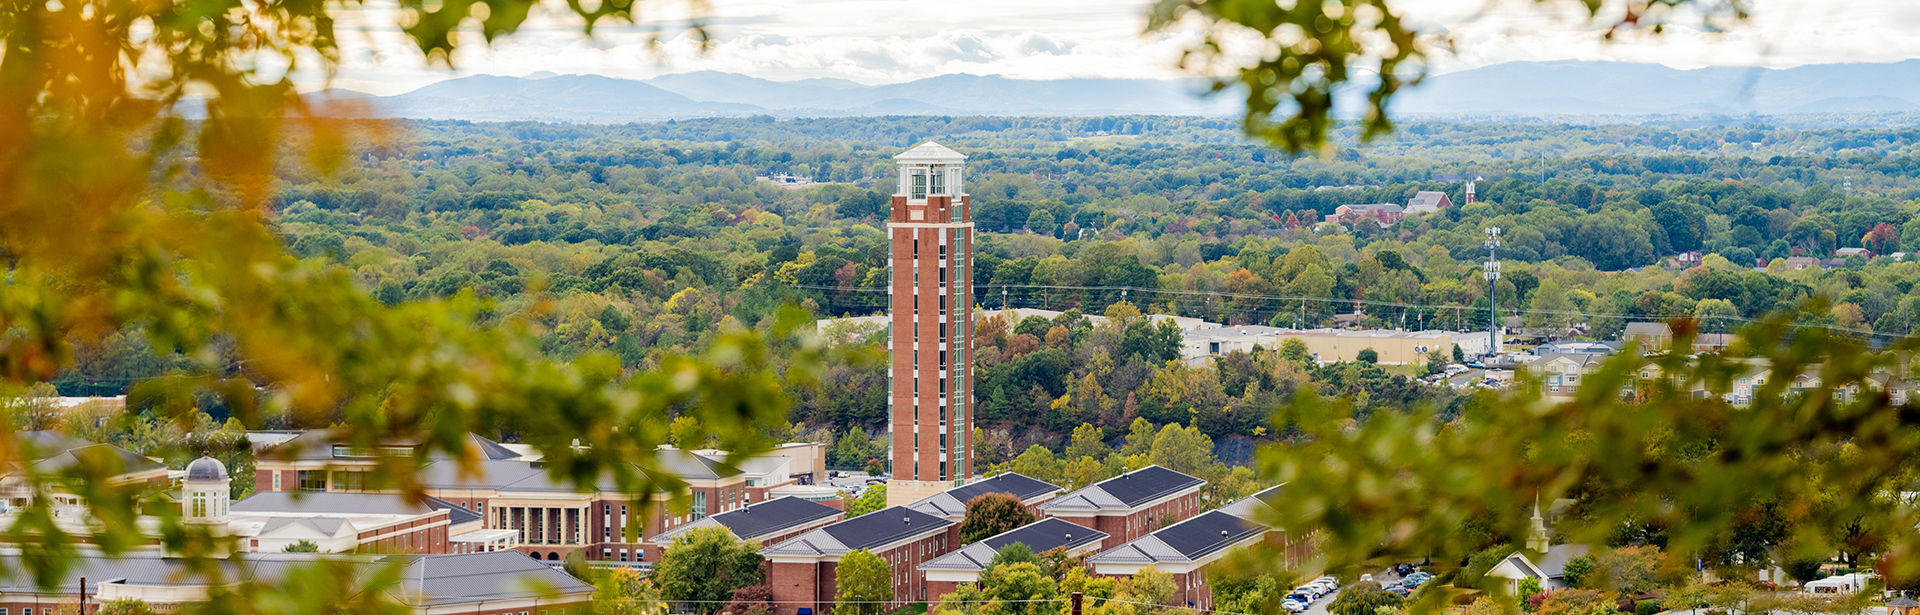 Liberty University announces plans to fully reopen in August » Liberty News